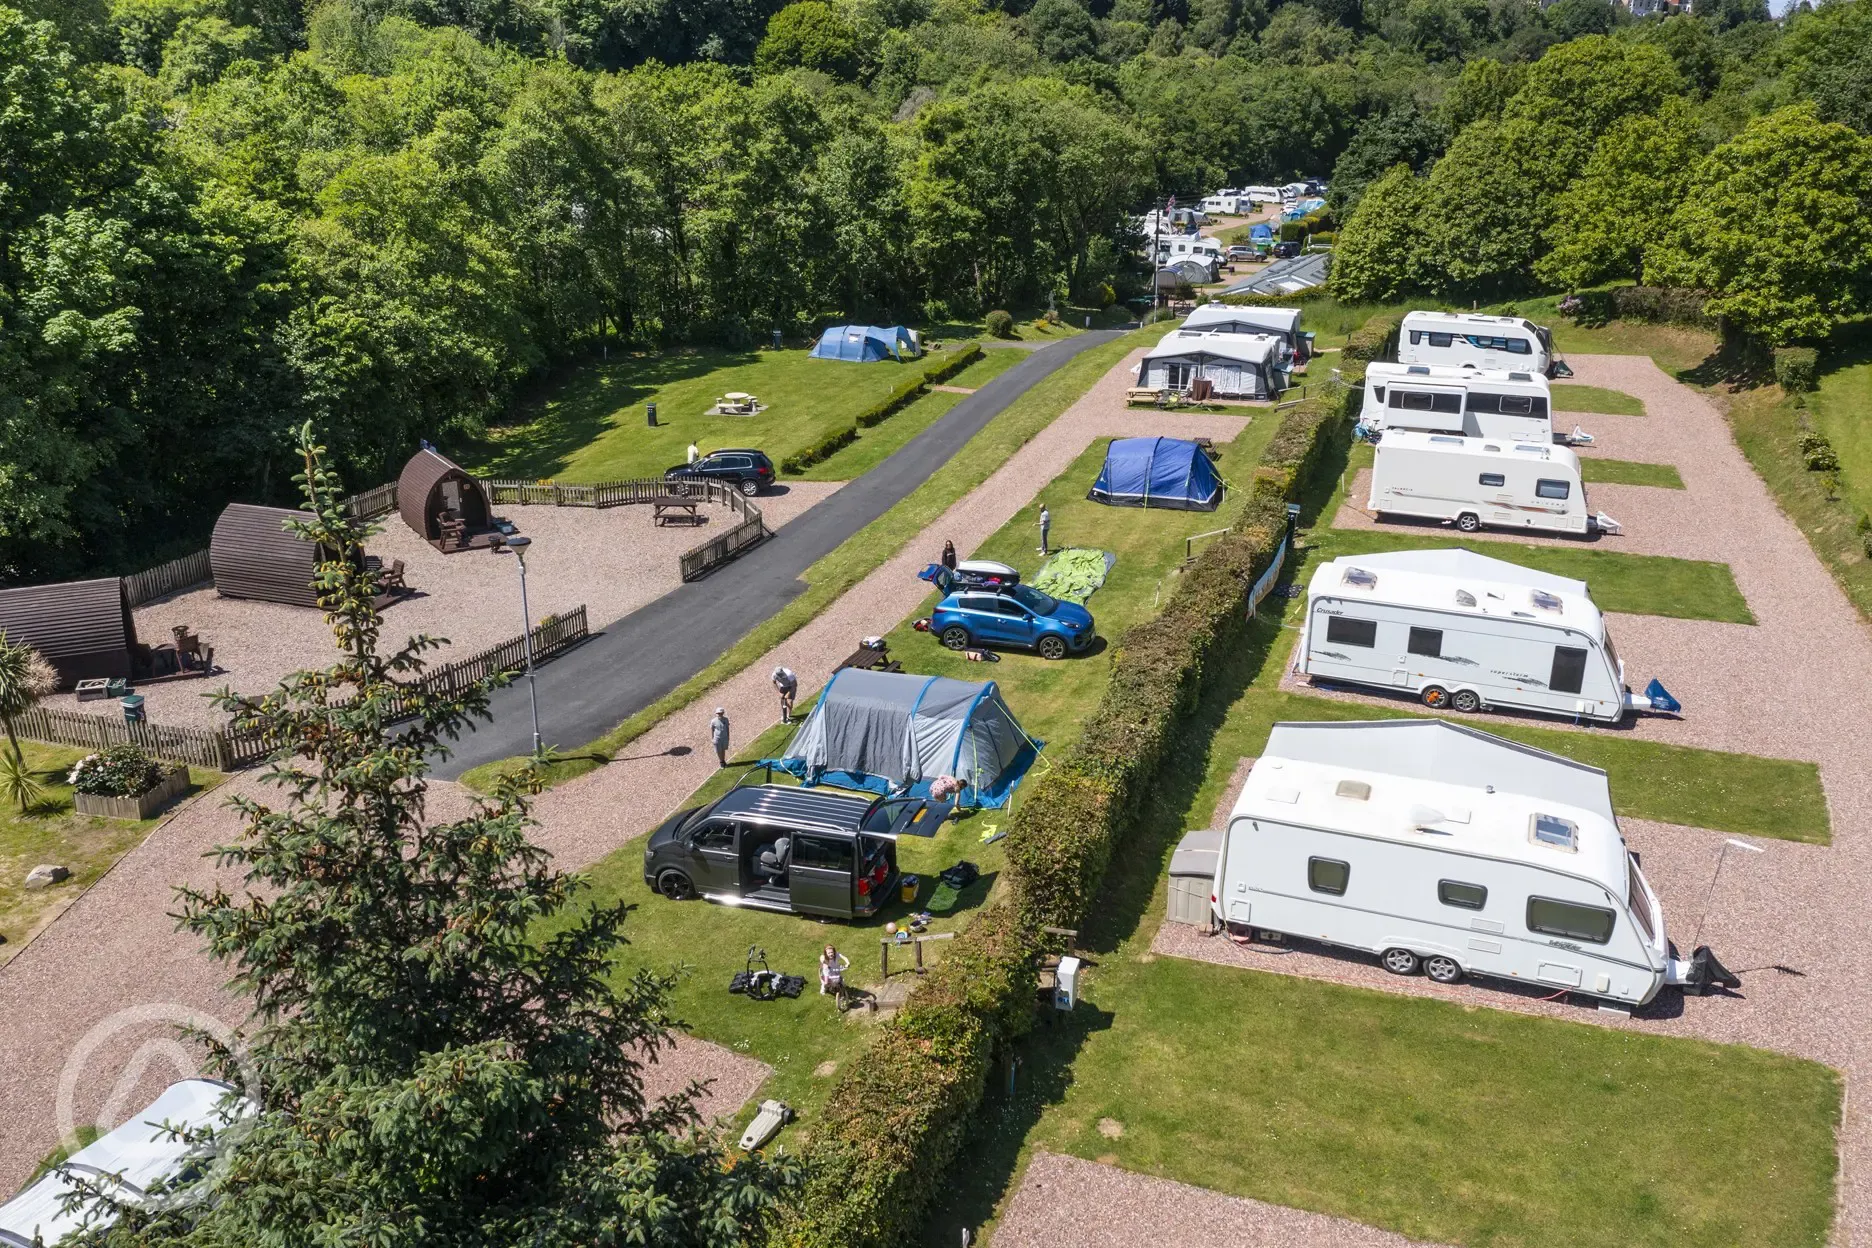 Aerial view of the pitches and camping pods